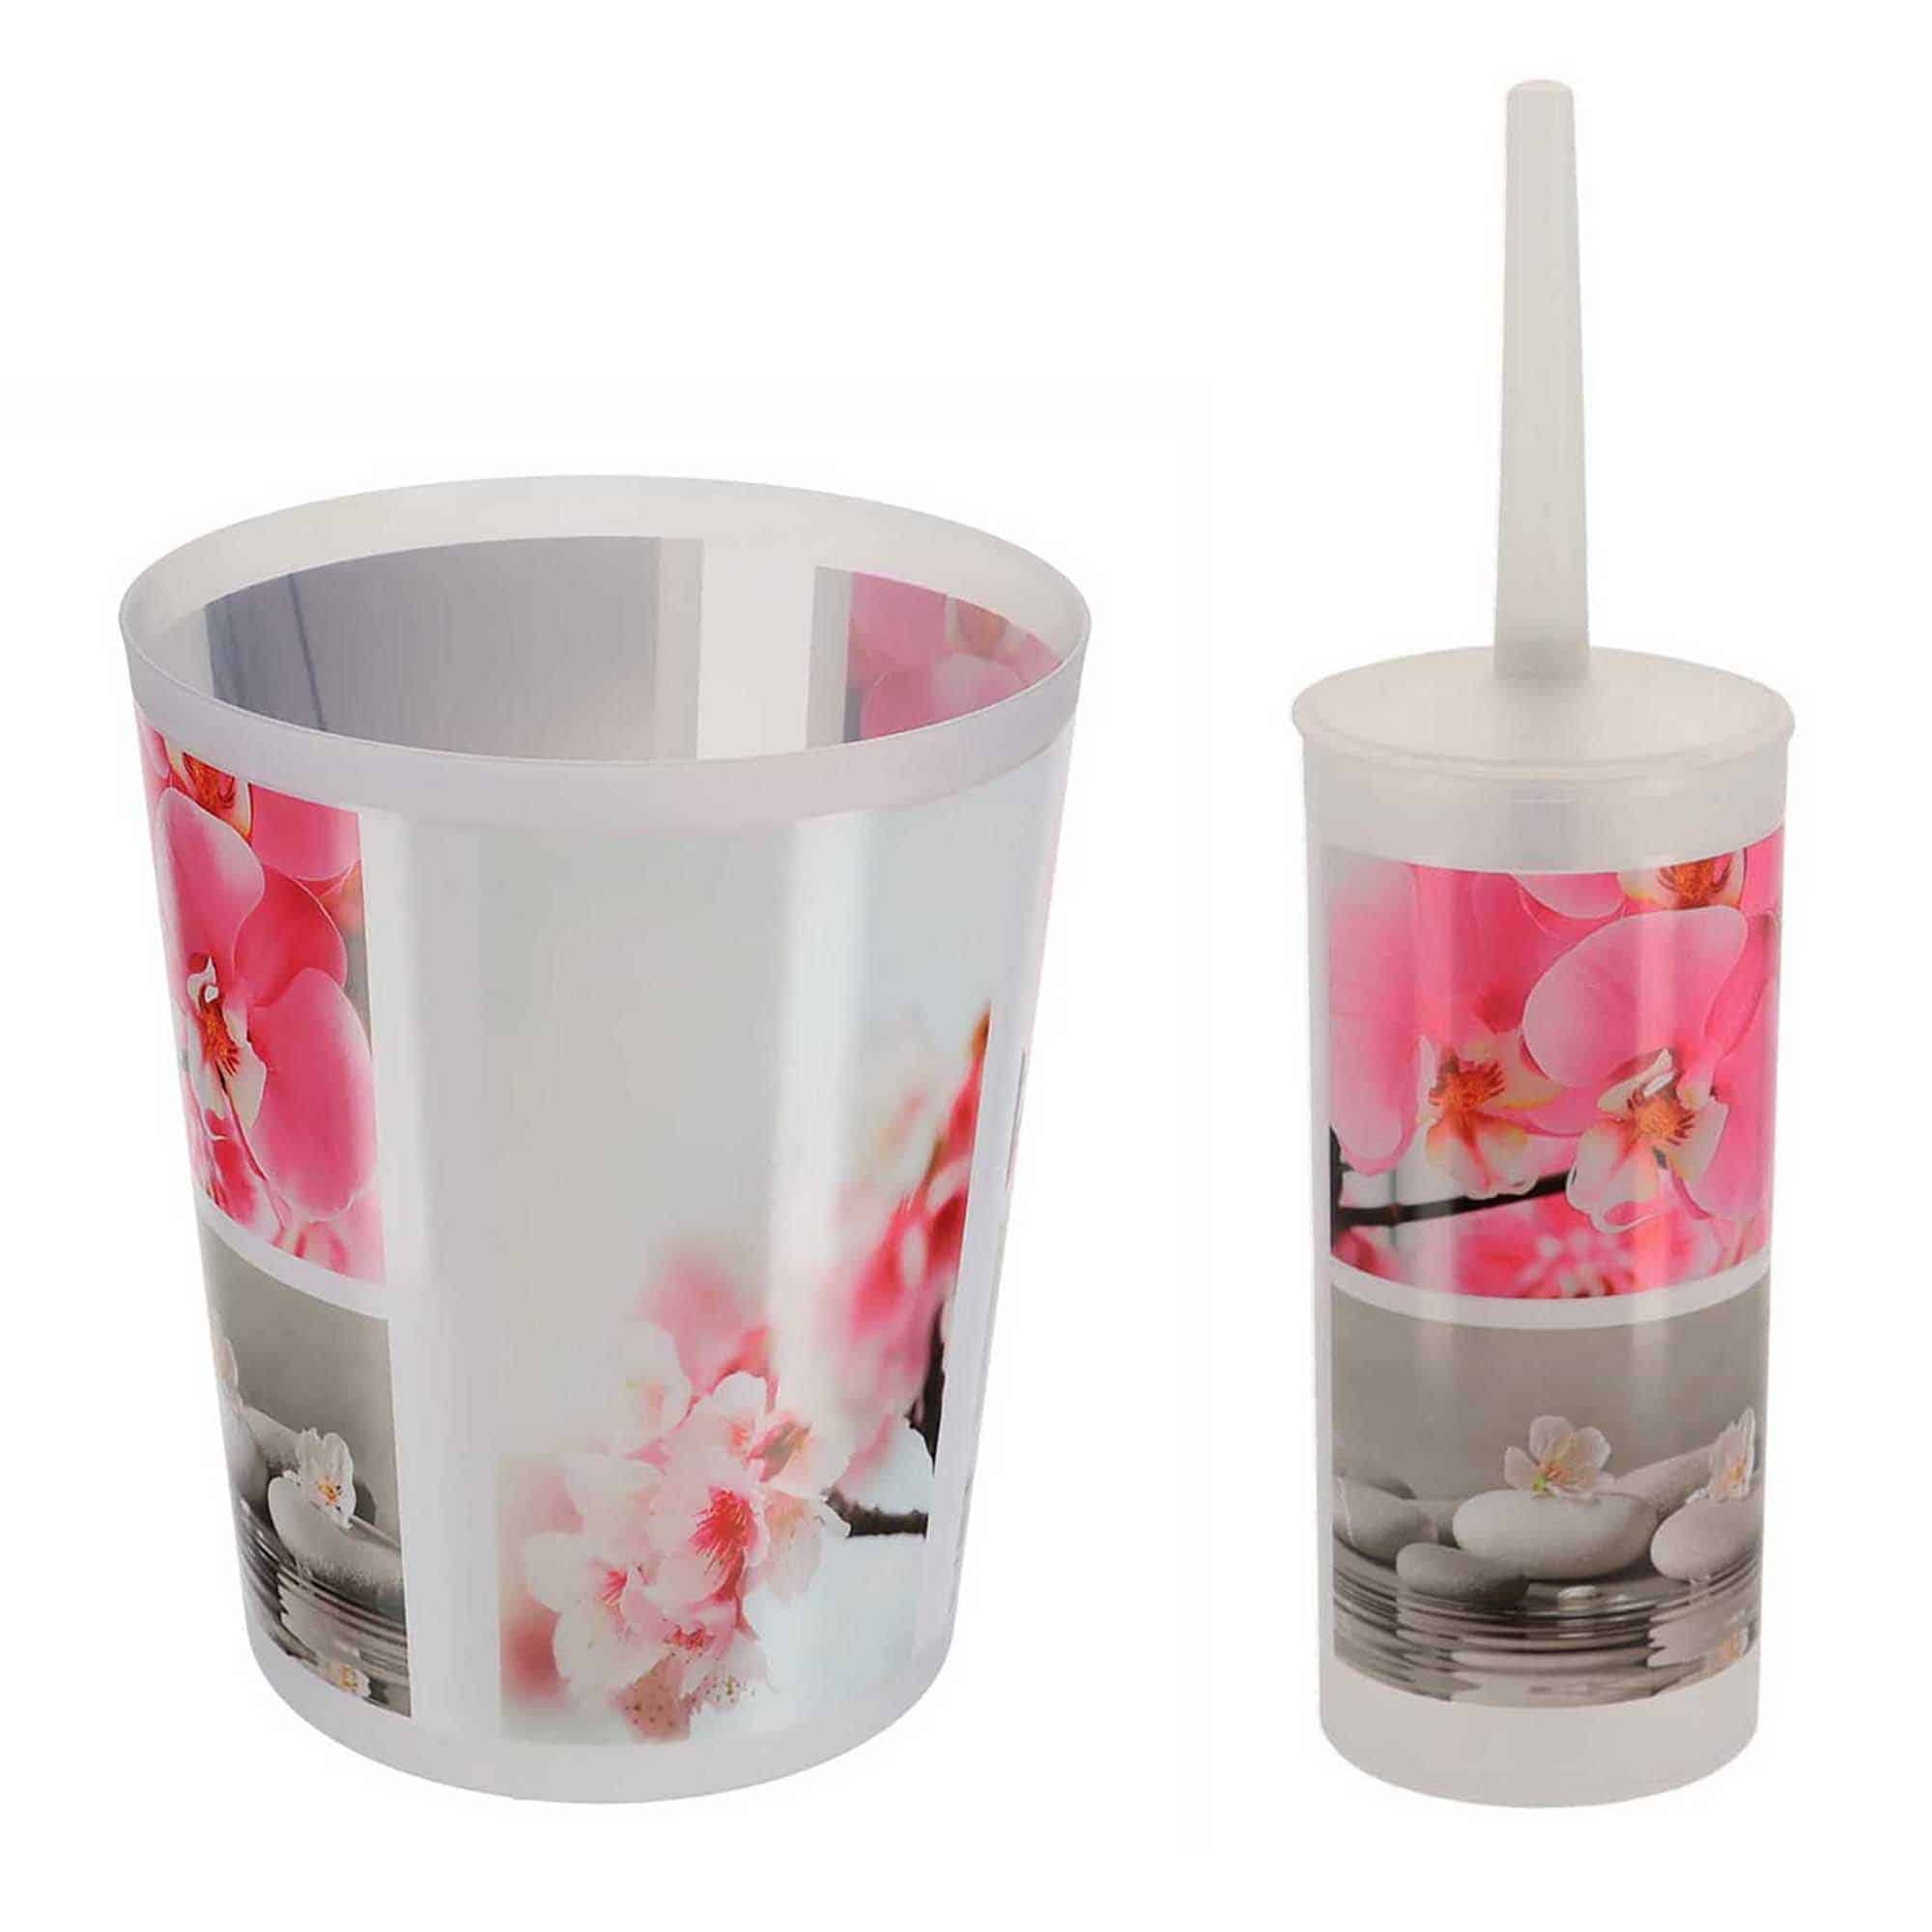 decorative plastic trash can and toilet brush with flower and pebble design